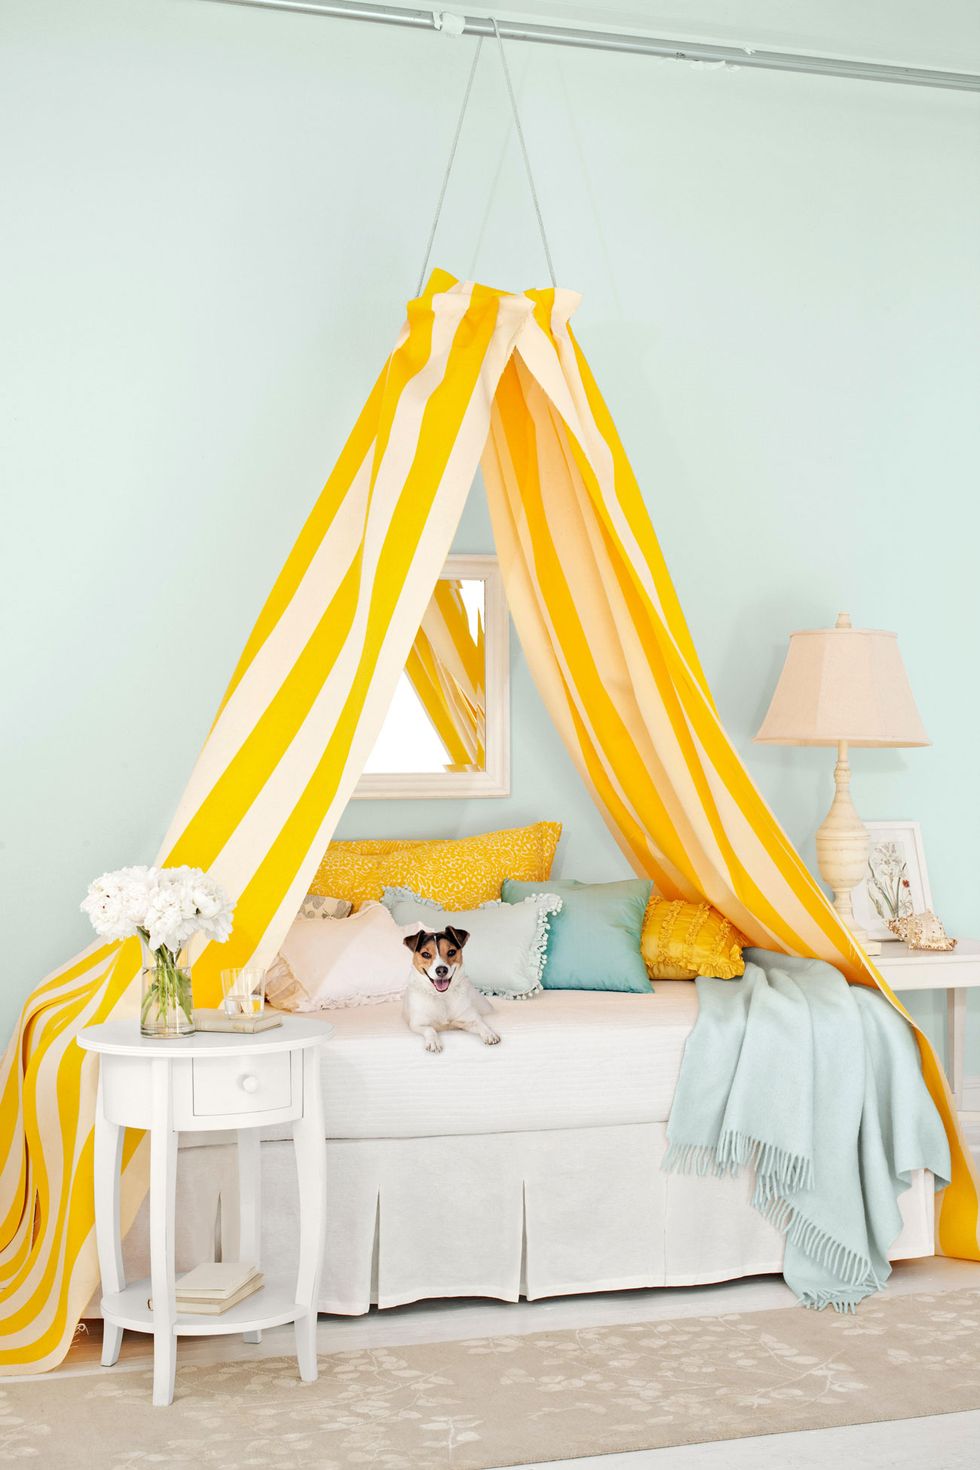 10 DIY Canopy Beds - Bedroom and Canopy Decorating Ideas